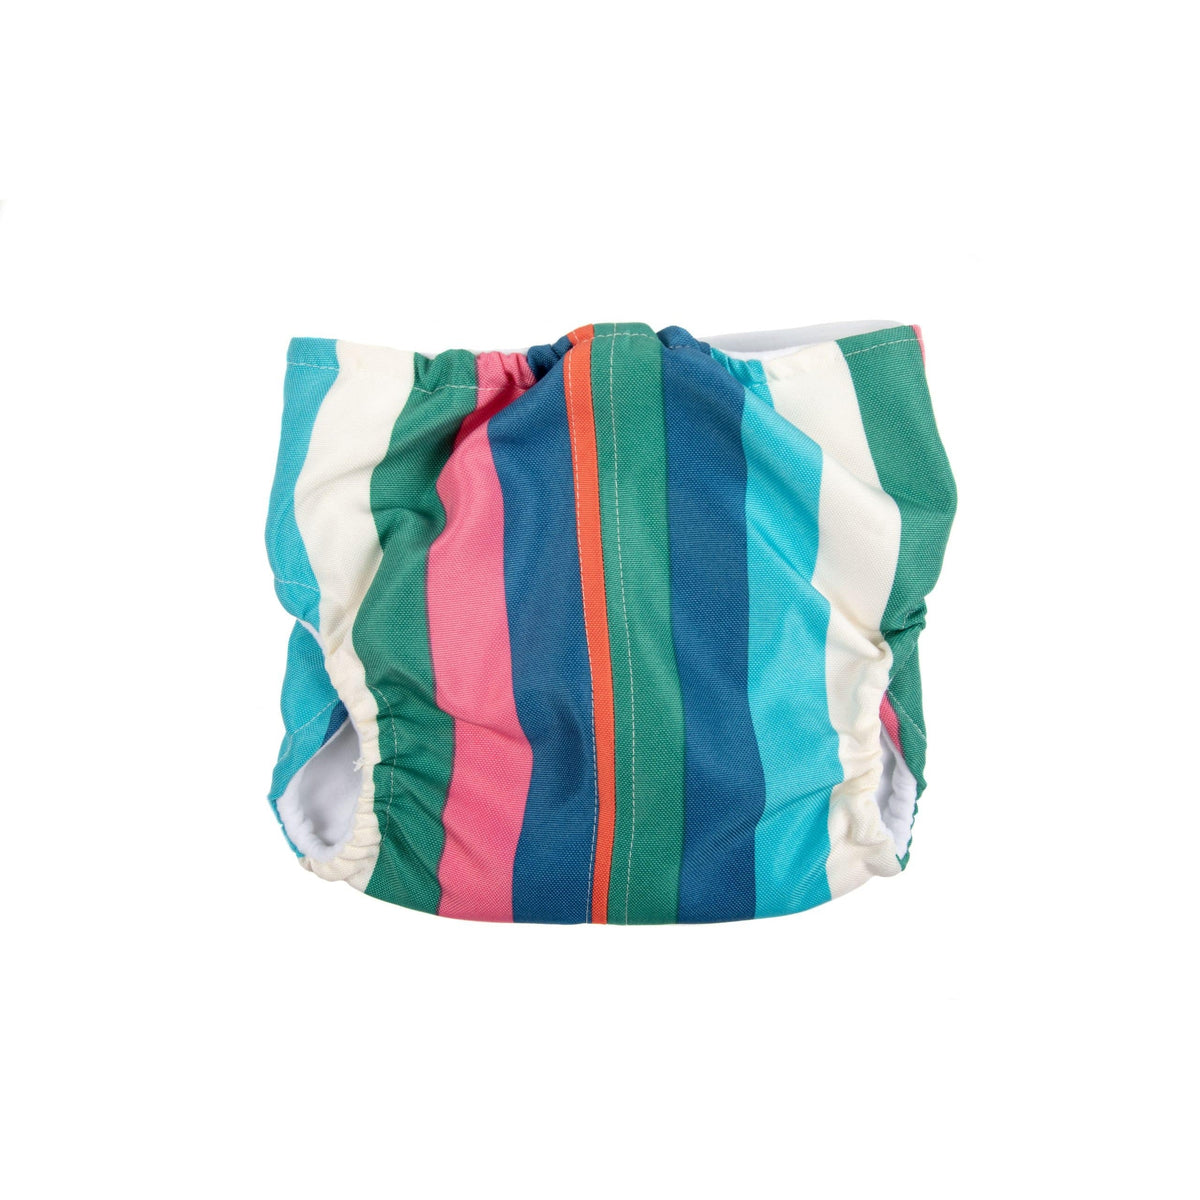 Dundies Rainbow All In One Nappy (AIO)-Dundies Australia - Vet Recommended Pet Nappies